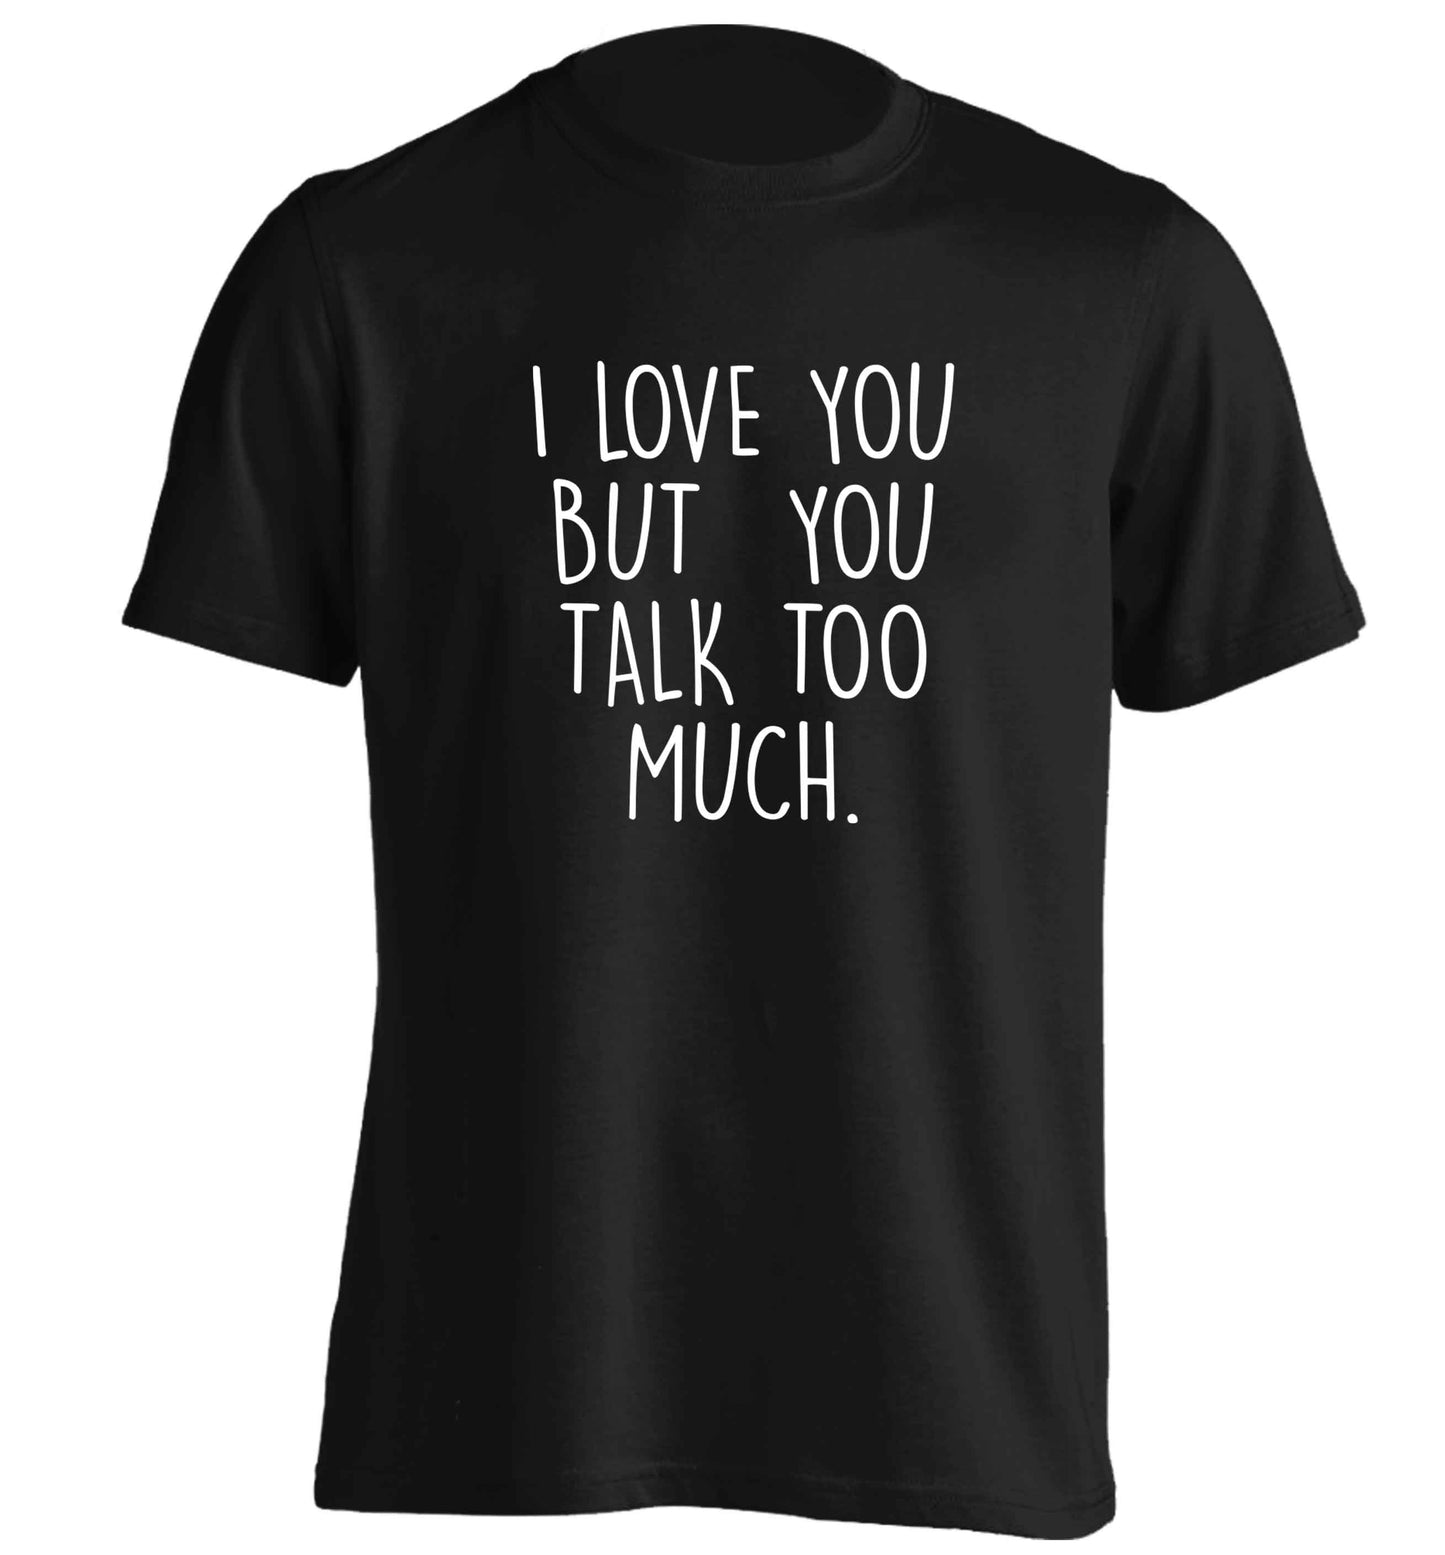 I love you but you talk too much adults unisex black Tshirt 2XL